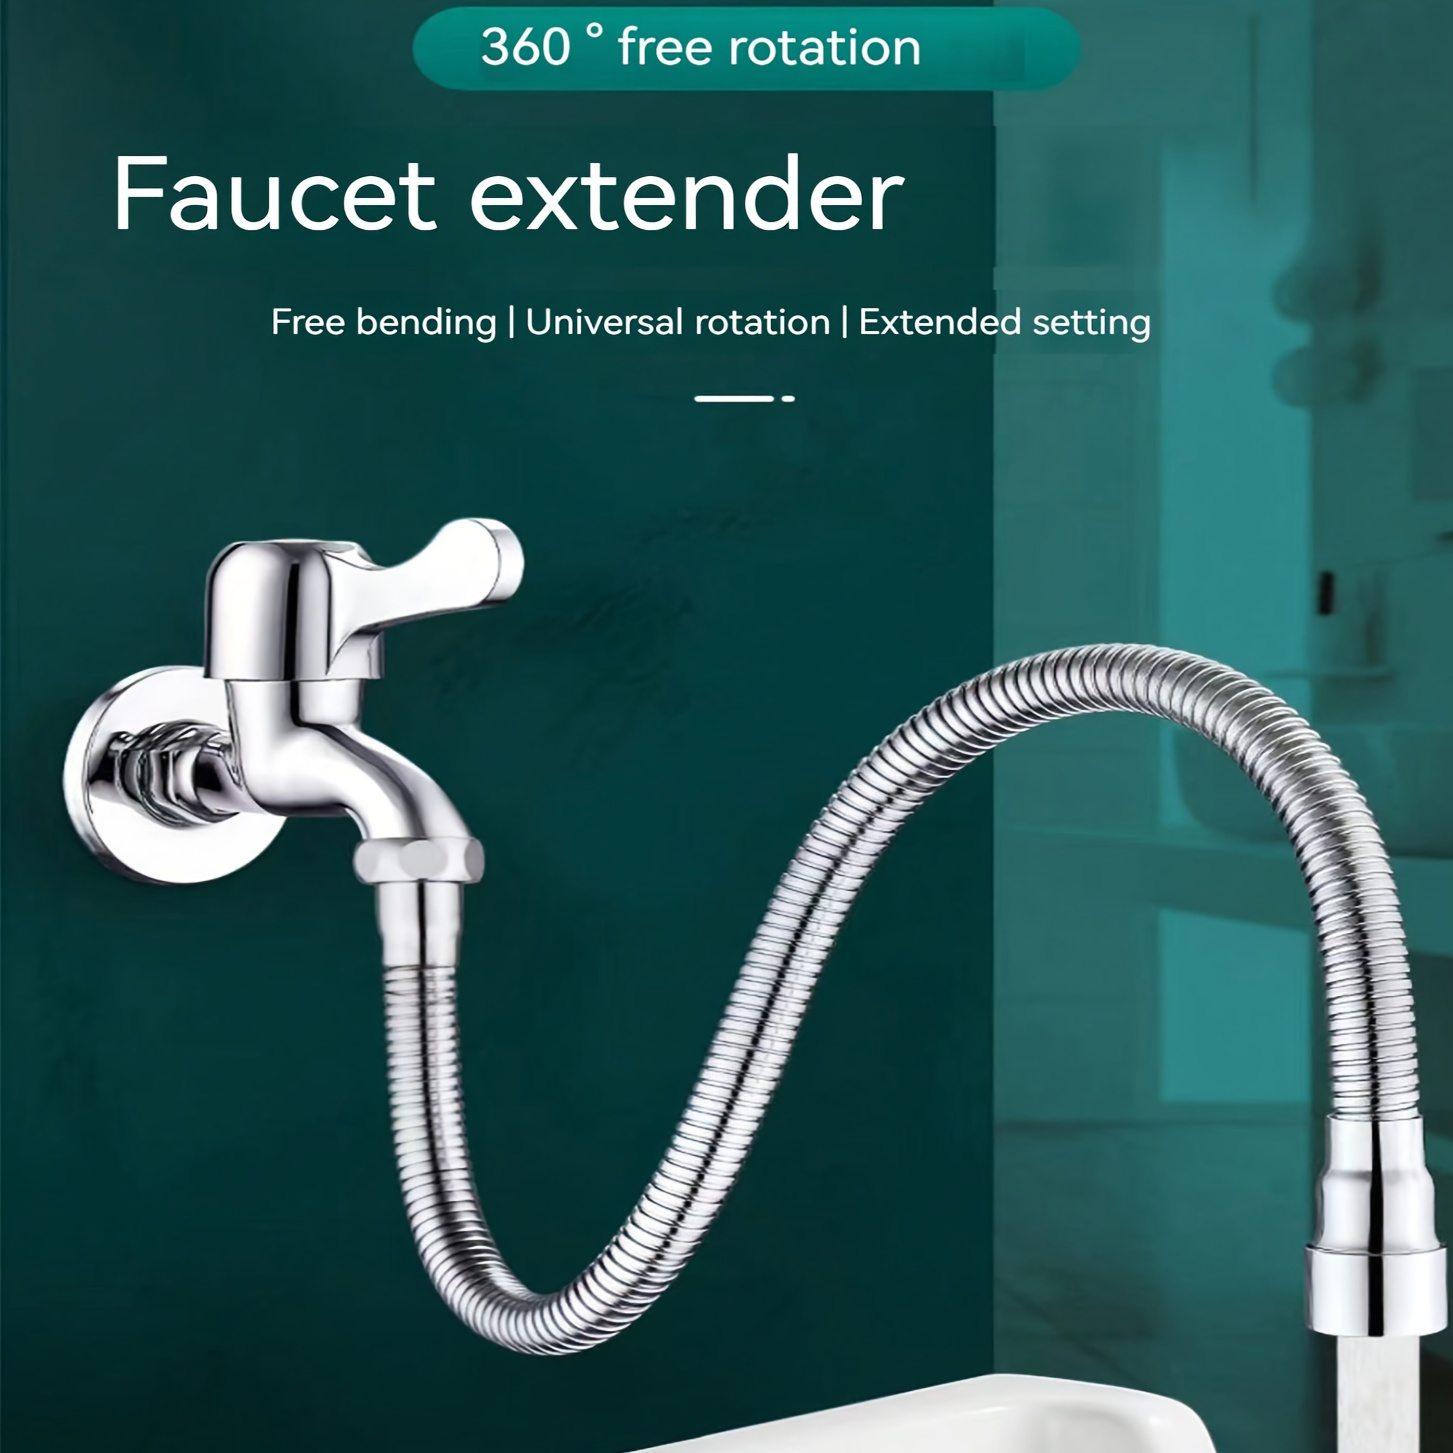 

360° Rotatable Stainless Steel Faucet Extender - High-pressure, Water-saving Kitchen & Bathroom Accessory, Available In 7.87" Or 19.69" Lengths